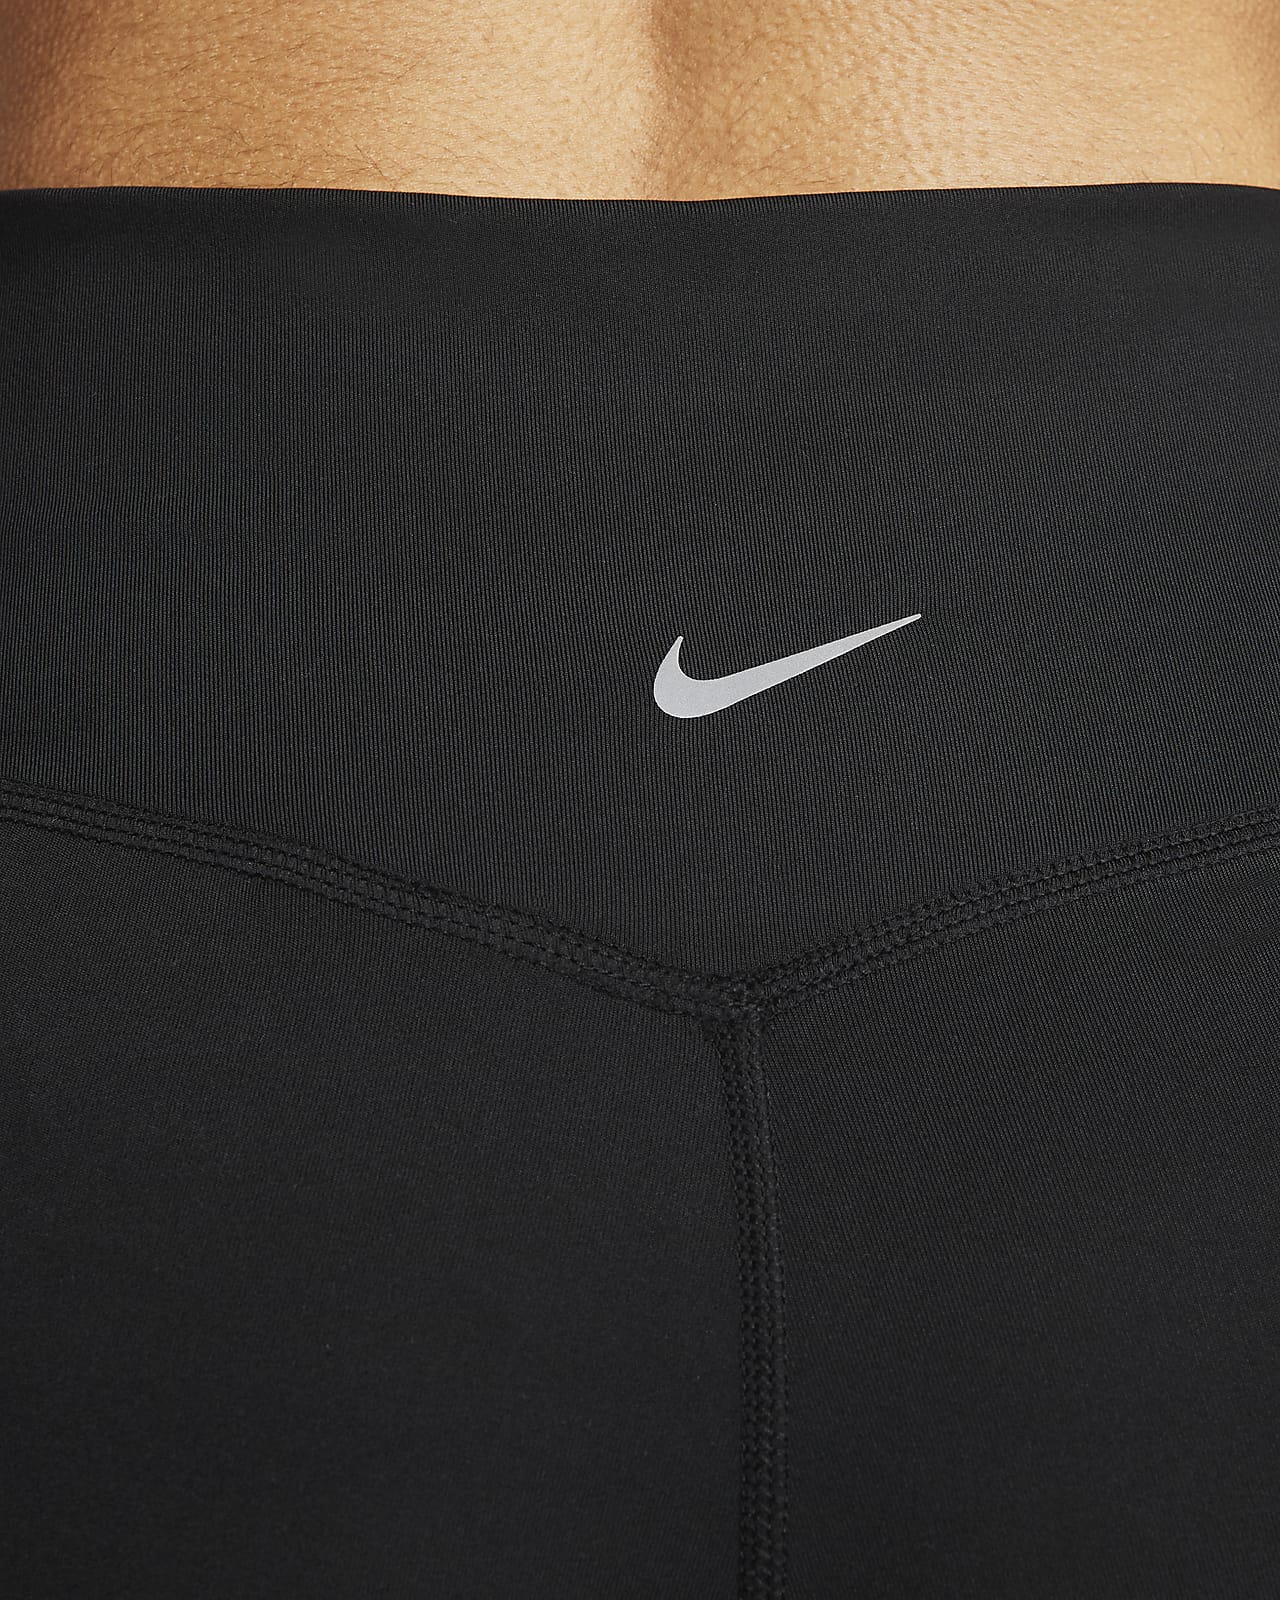 Womens Nike Midrise Power Training Pants Size XS Black for sale online